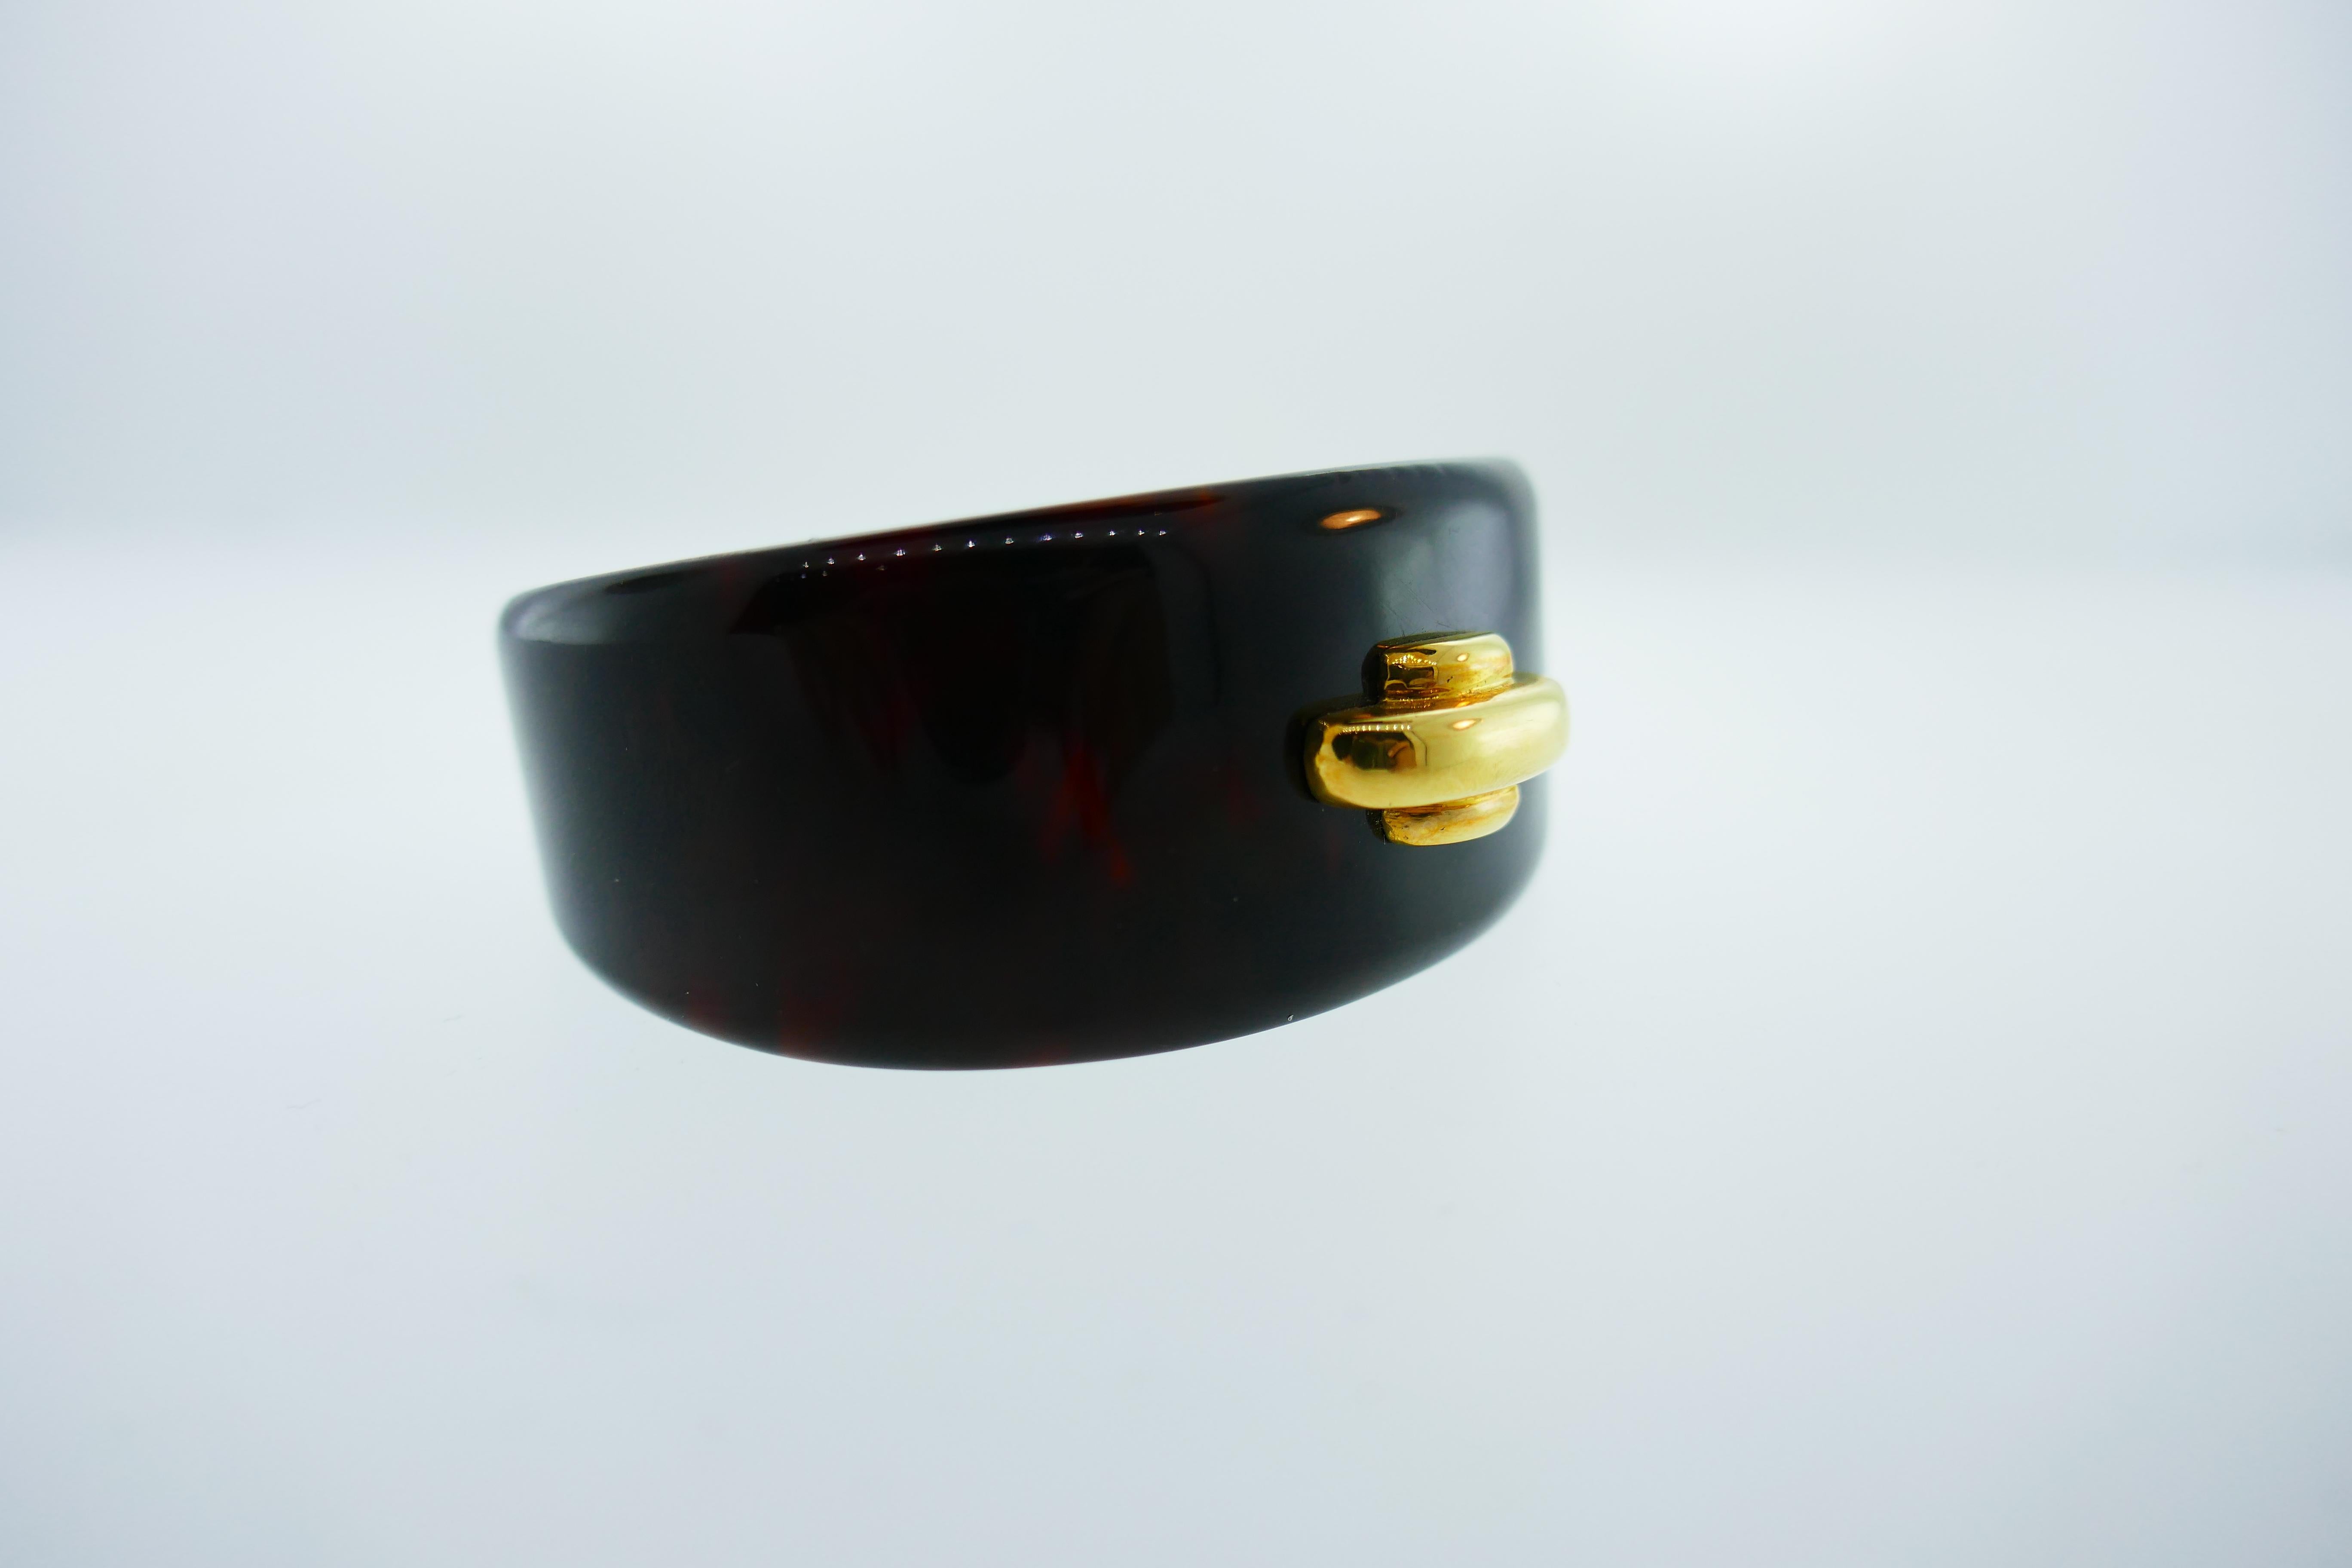 Cartier Aldo Cipullo 18k Yellow Gold & Bakelite Cuff Bangle Bracelet Vintage Circa 1970





Here is your chance to purchase a beautiful and highly collectible designer bracelet.  Truly a great piece at a great price! 



Weight: 16.1